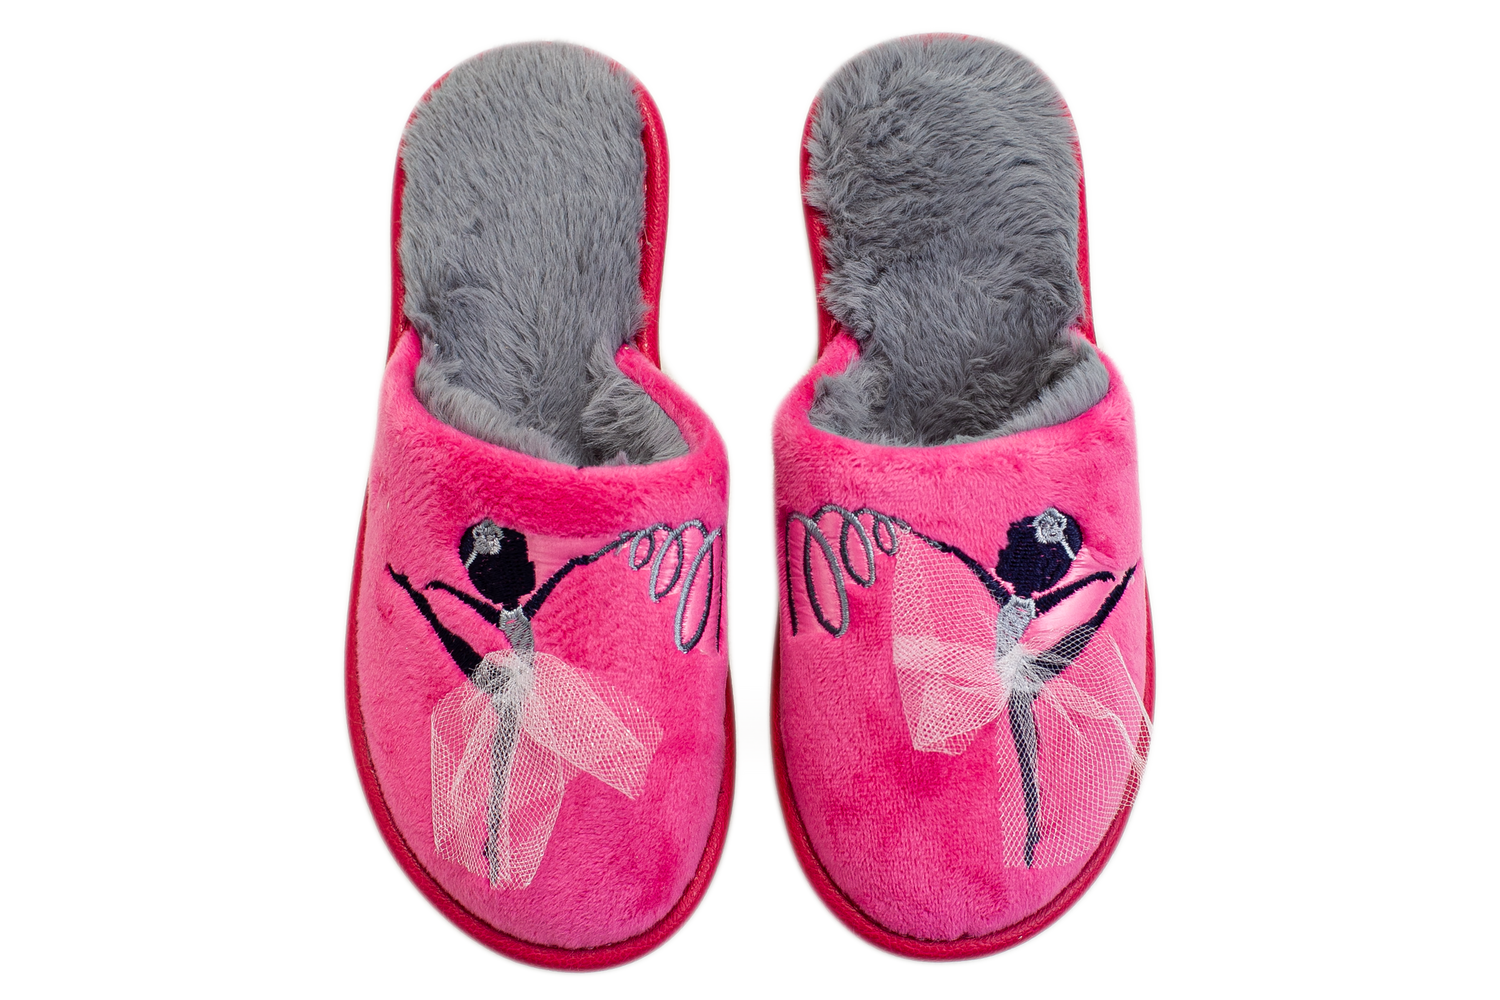 Children's velour slippers with embroidery - 3